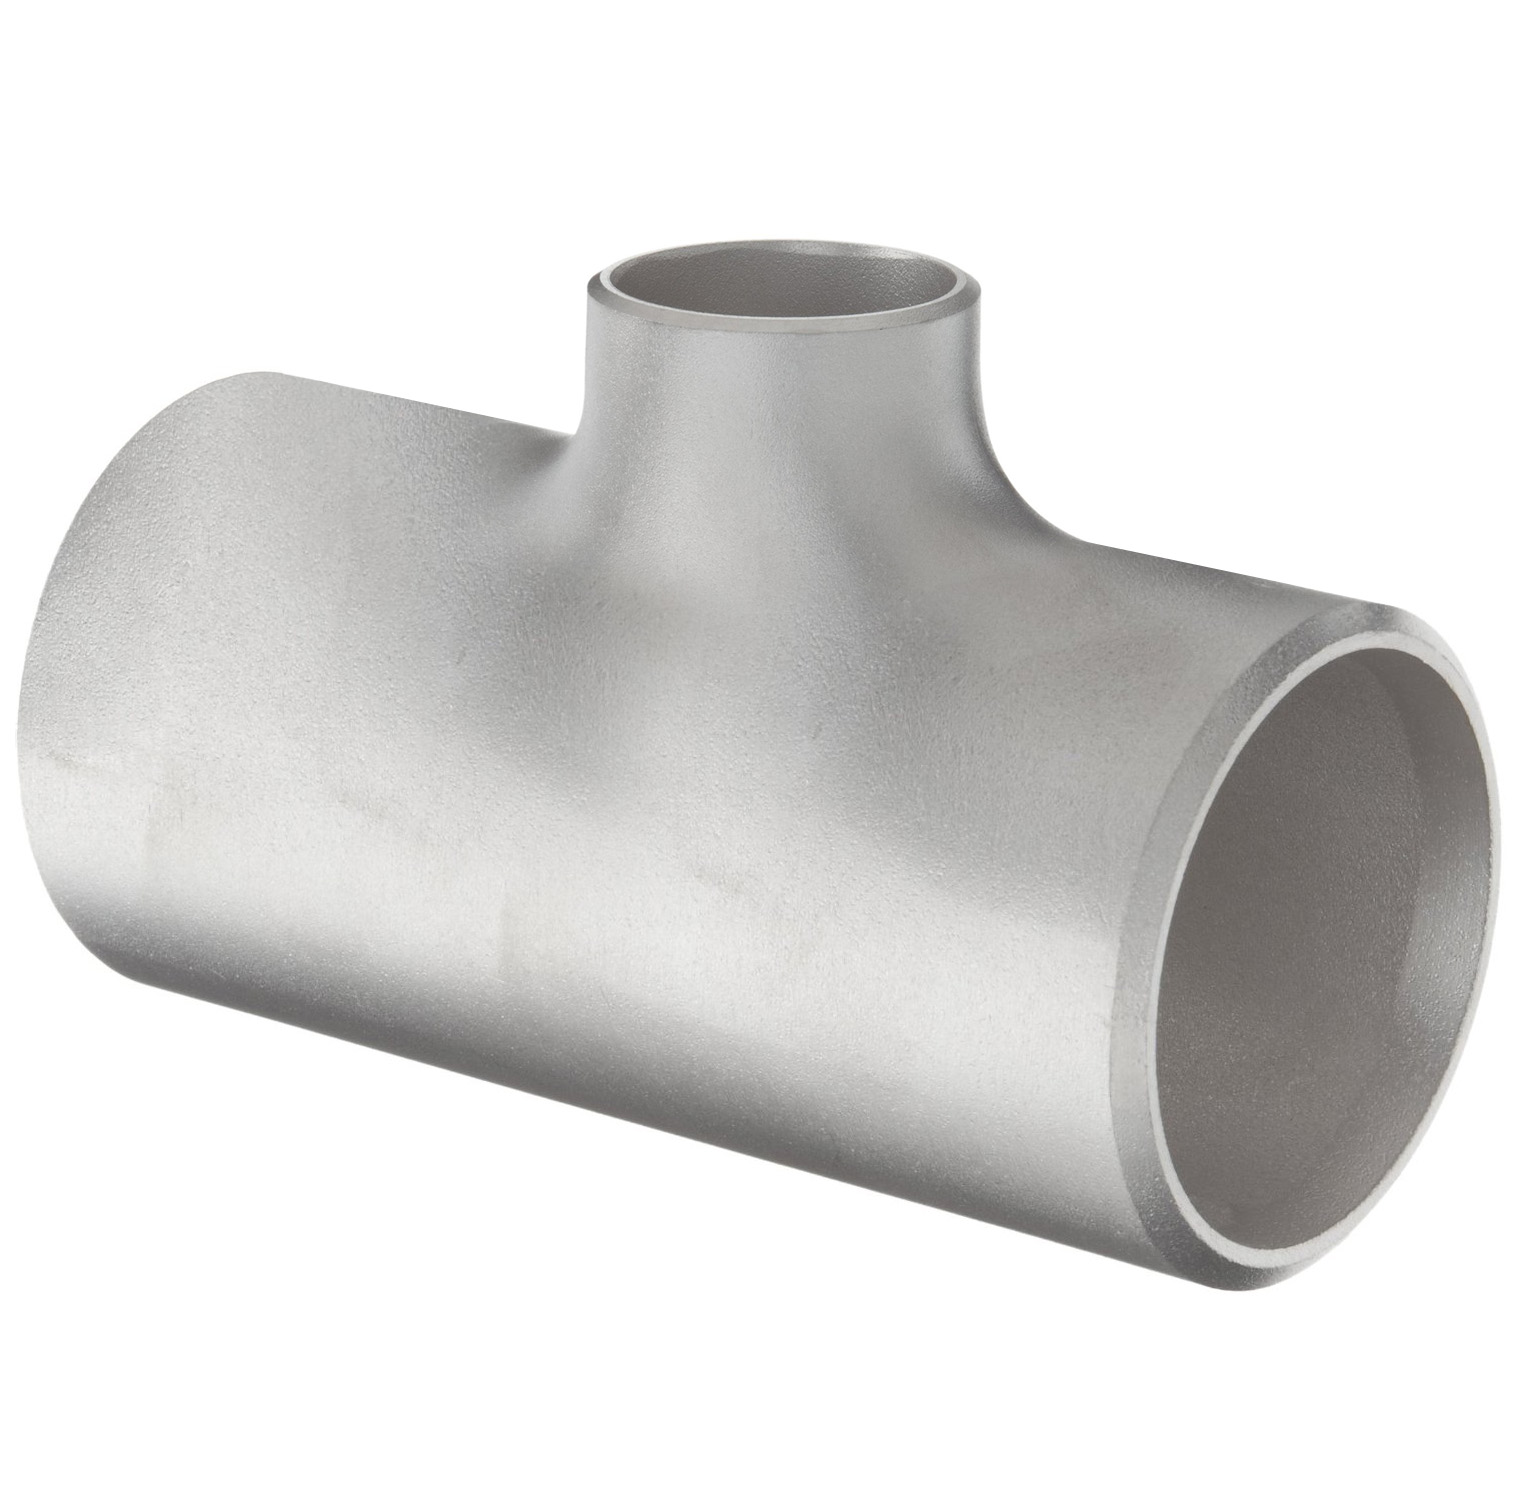 1-1/2" TEE SHORT BUTT WELD 3-WAY 304 STAINLESS STEEL Sanitary Pipe Fitting 1.5 